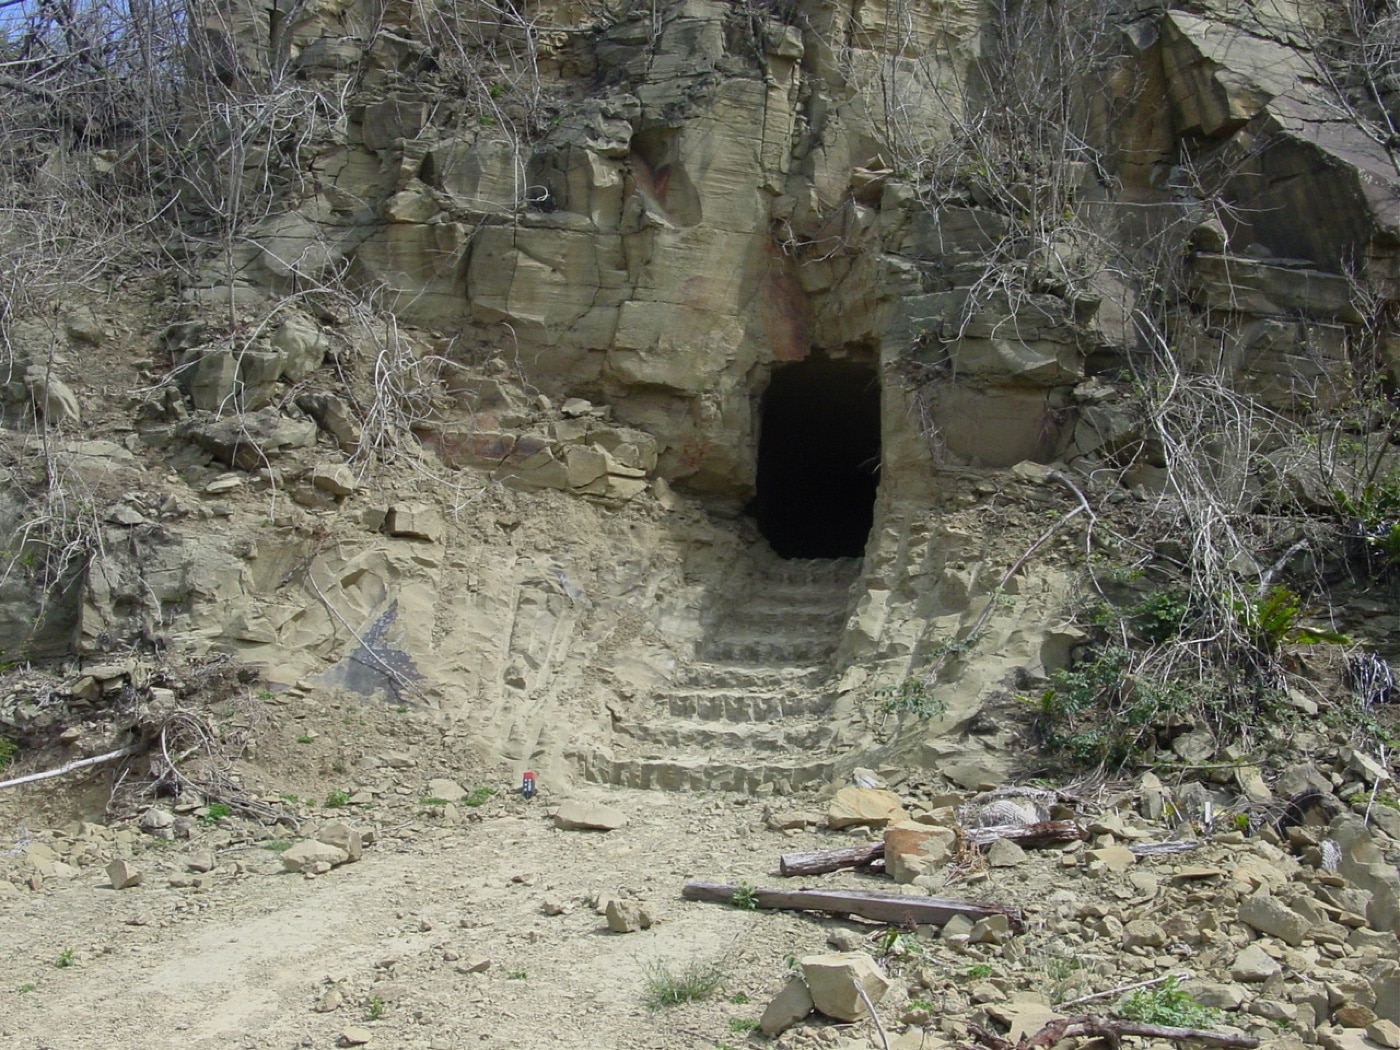 The entrance to what is believed to be one of General Kuribayashi’s command posts on Iwo Jima. This one is extensive and winds deep into Iwo Jima’s sweltering interior. Image: Dale A. Dye